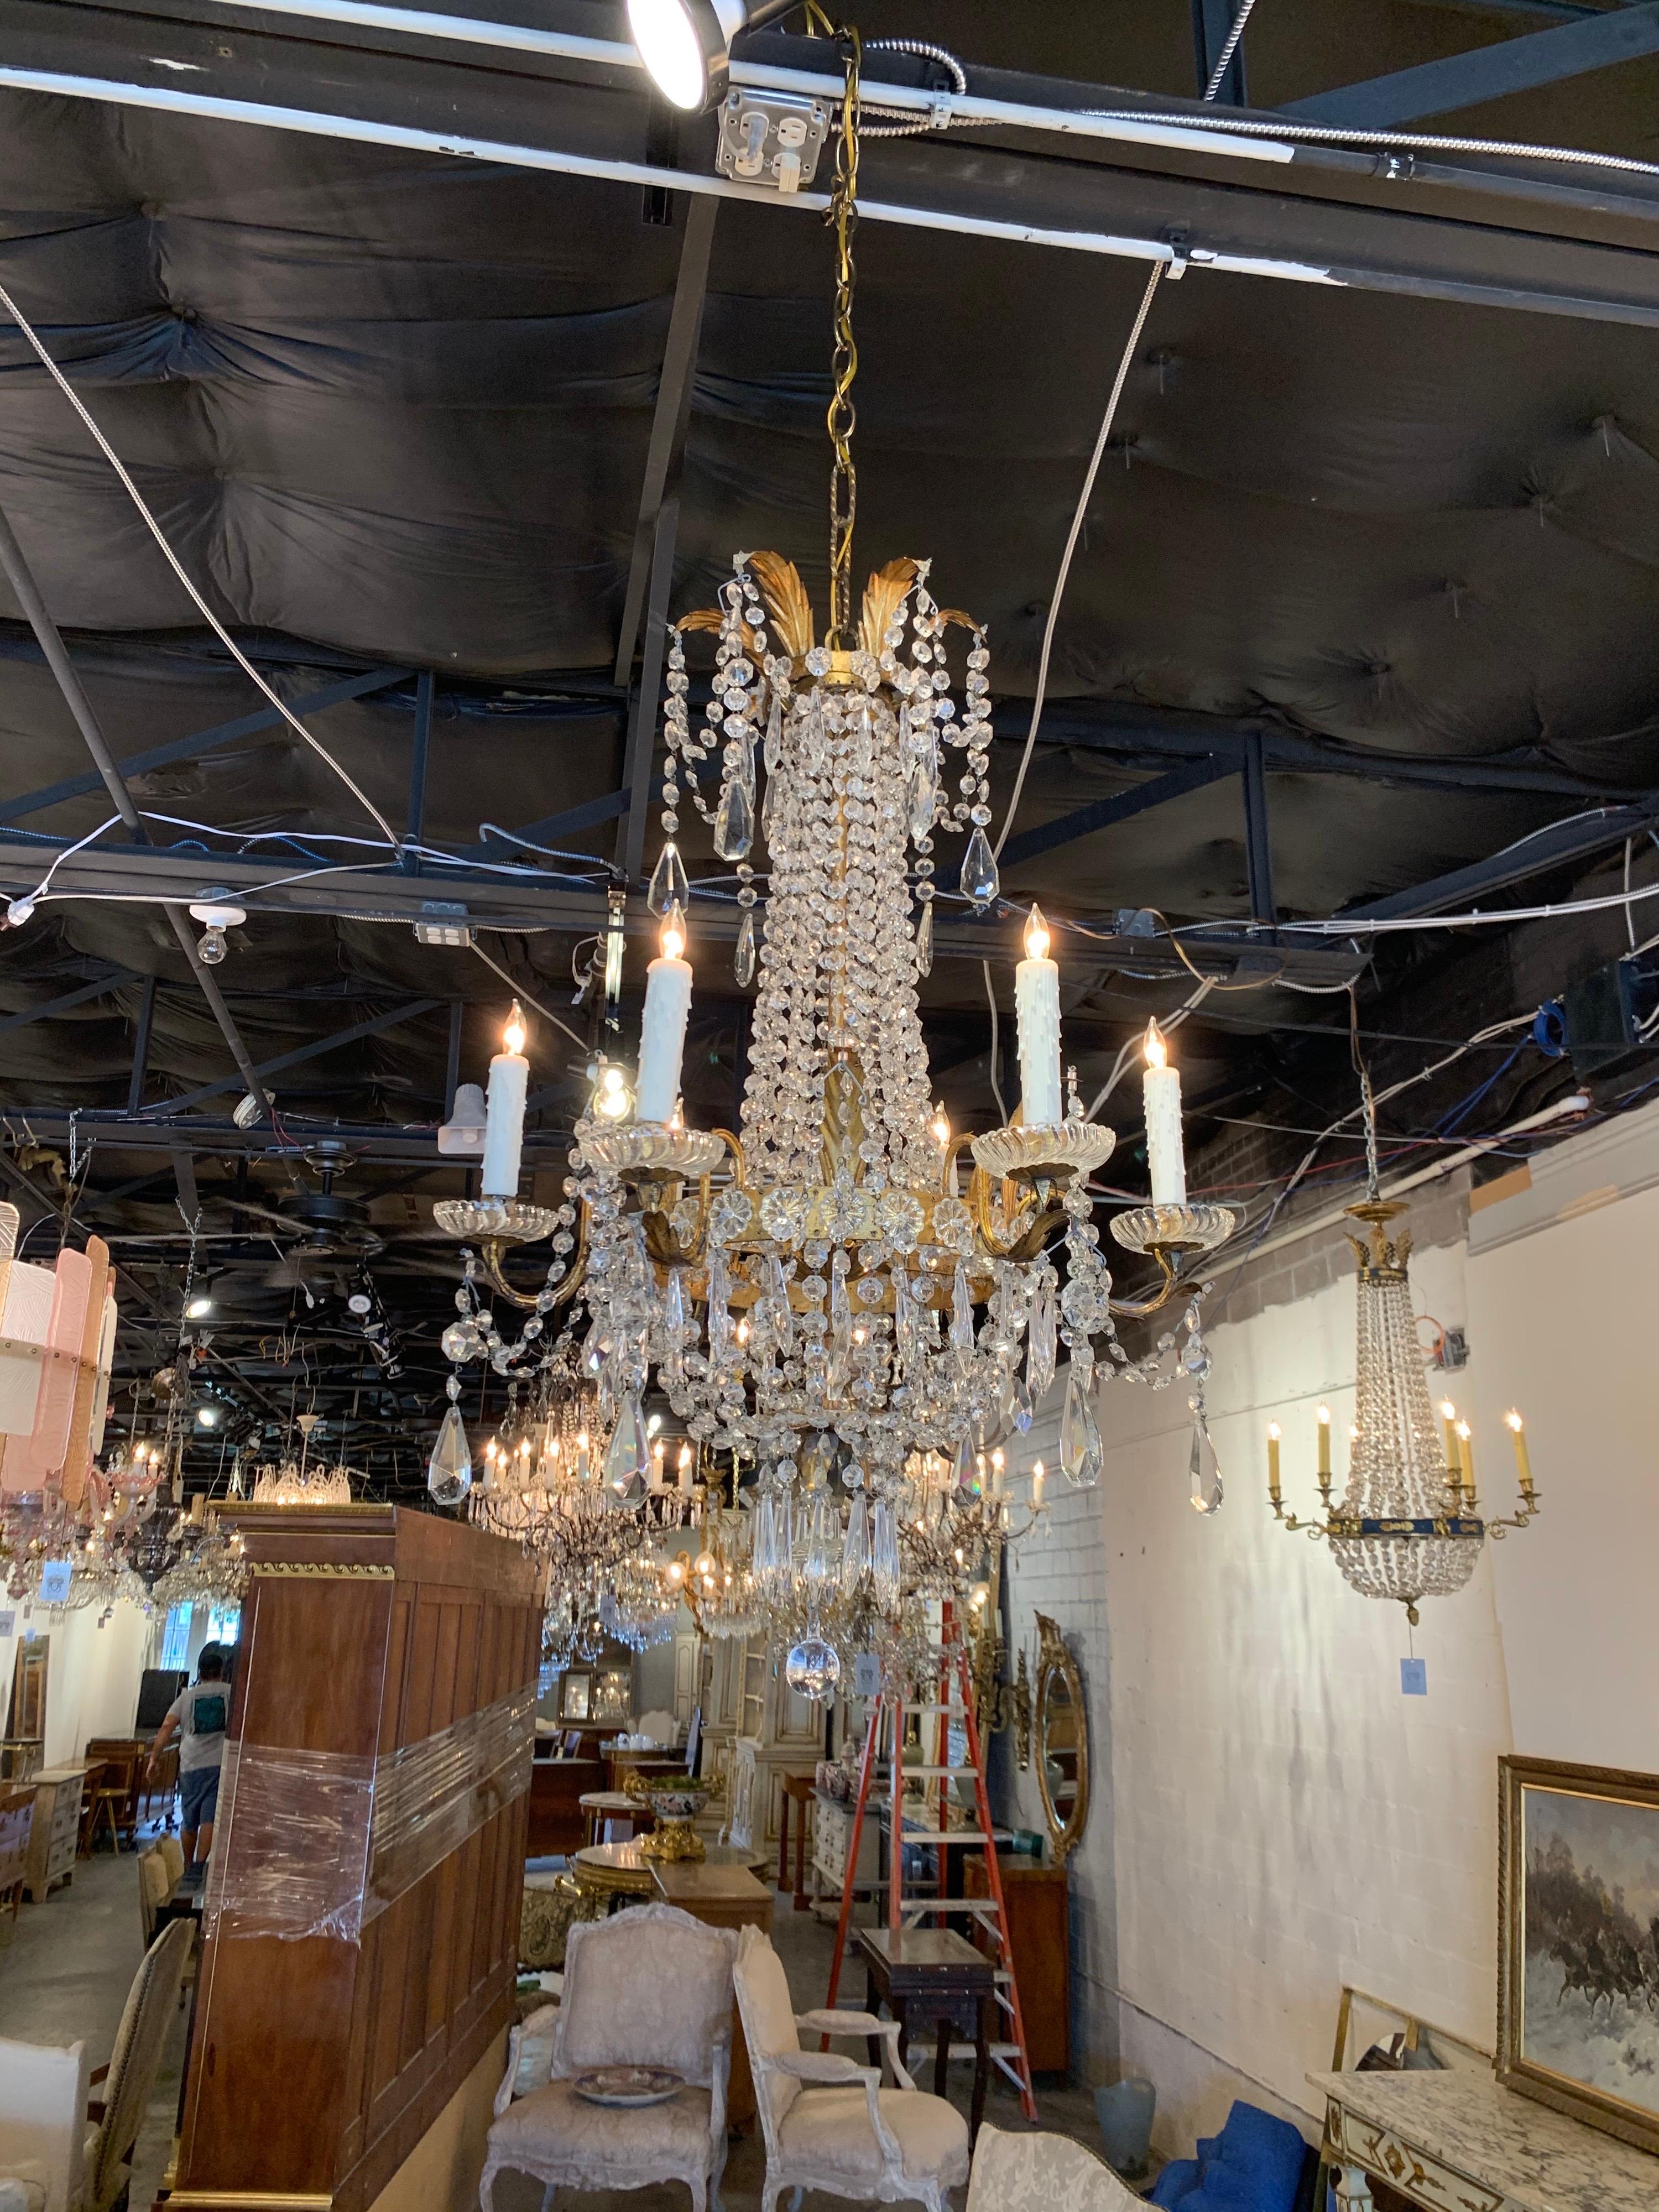 Exquisite late 19th century Italian Empire style crystal chandelier with 6 lights. Covered in beautiful cut crystals. Nice details on the base including leaves at the top and on the arms. Makes a very elegant statement!